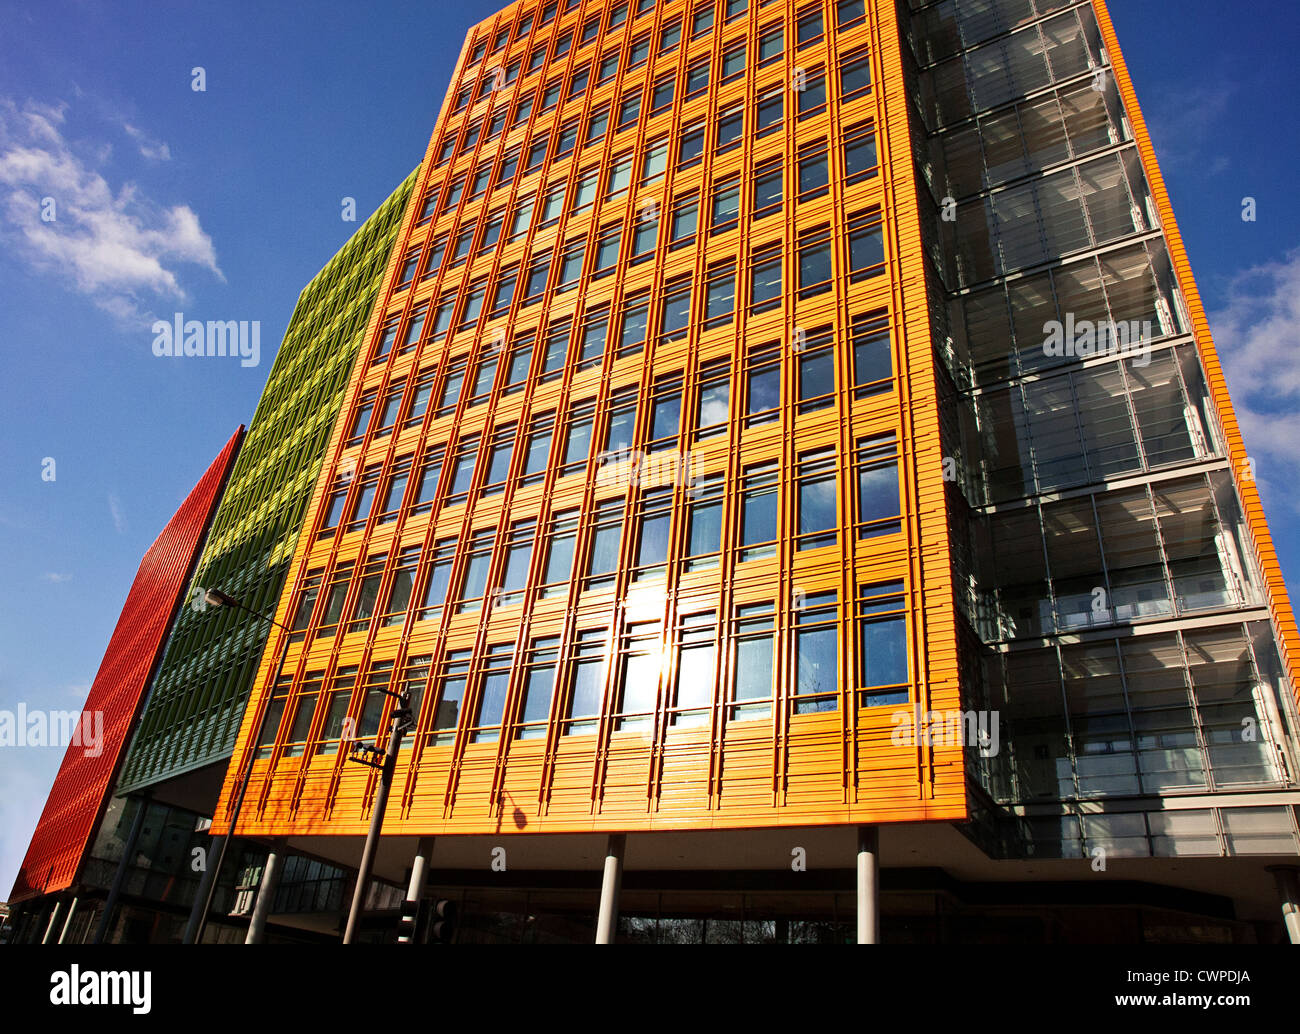 UK. England. London. Central St. Giles Piazza. Modern office buildings. Stock Photo